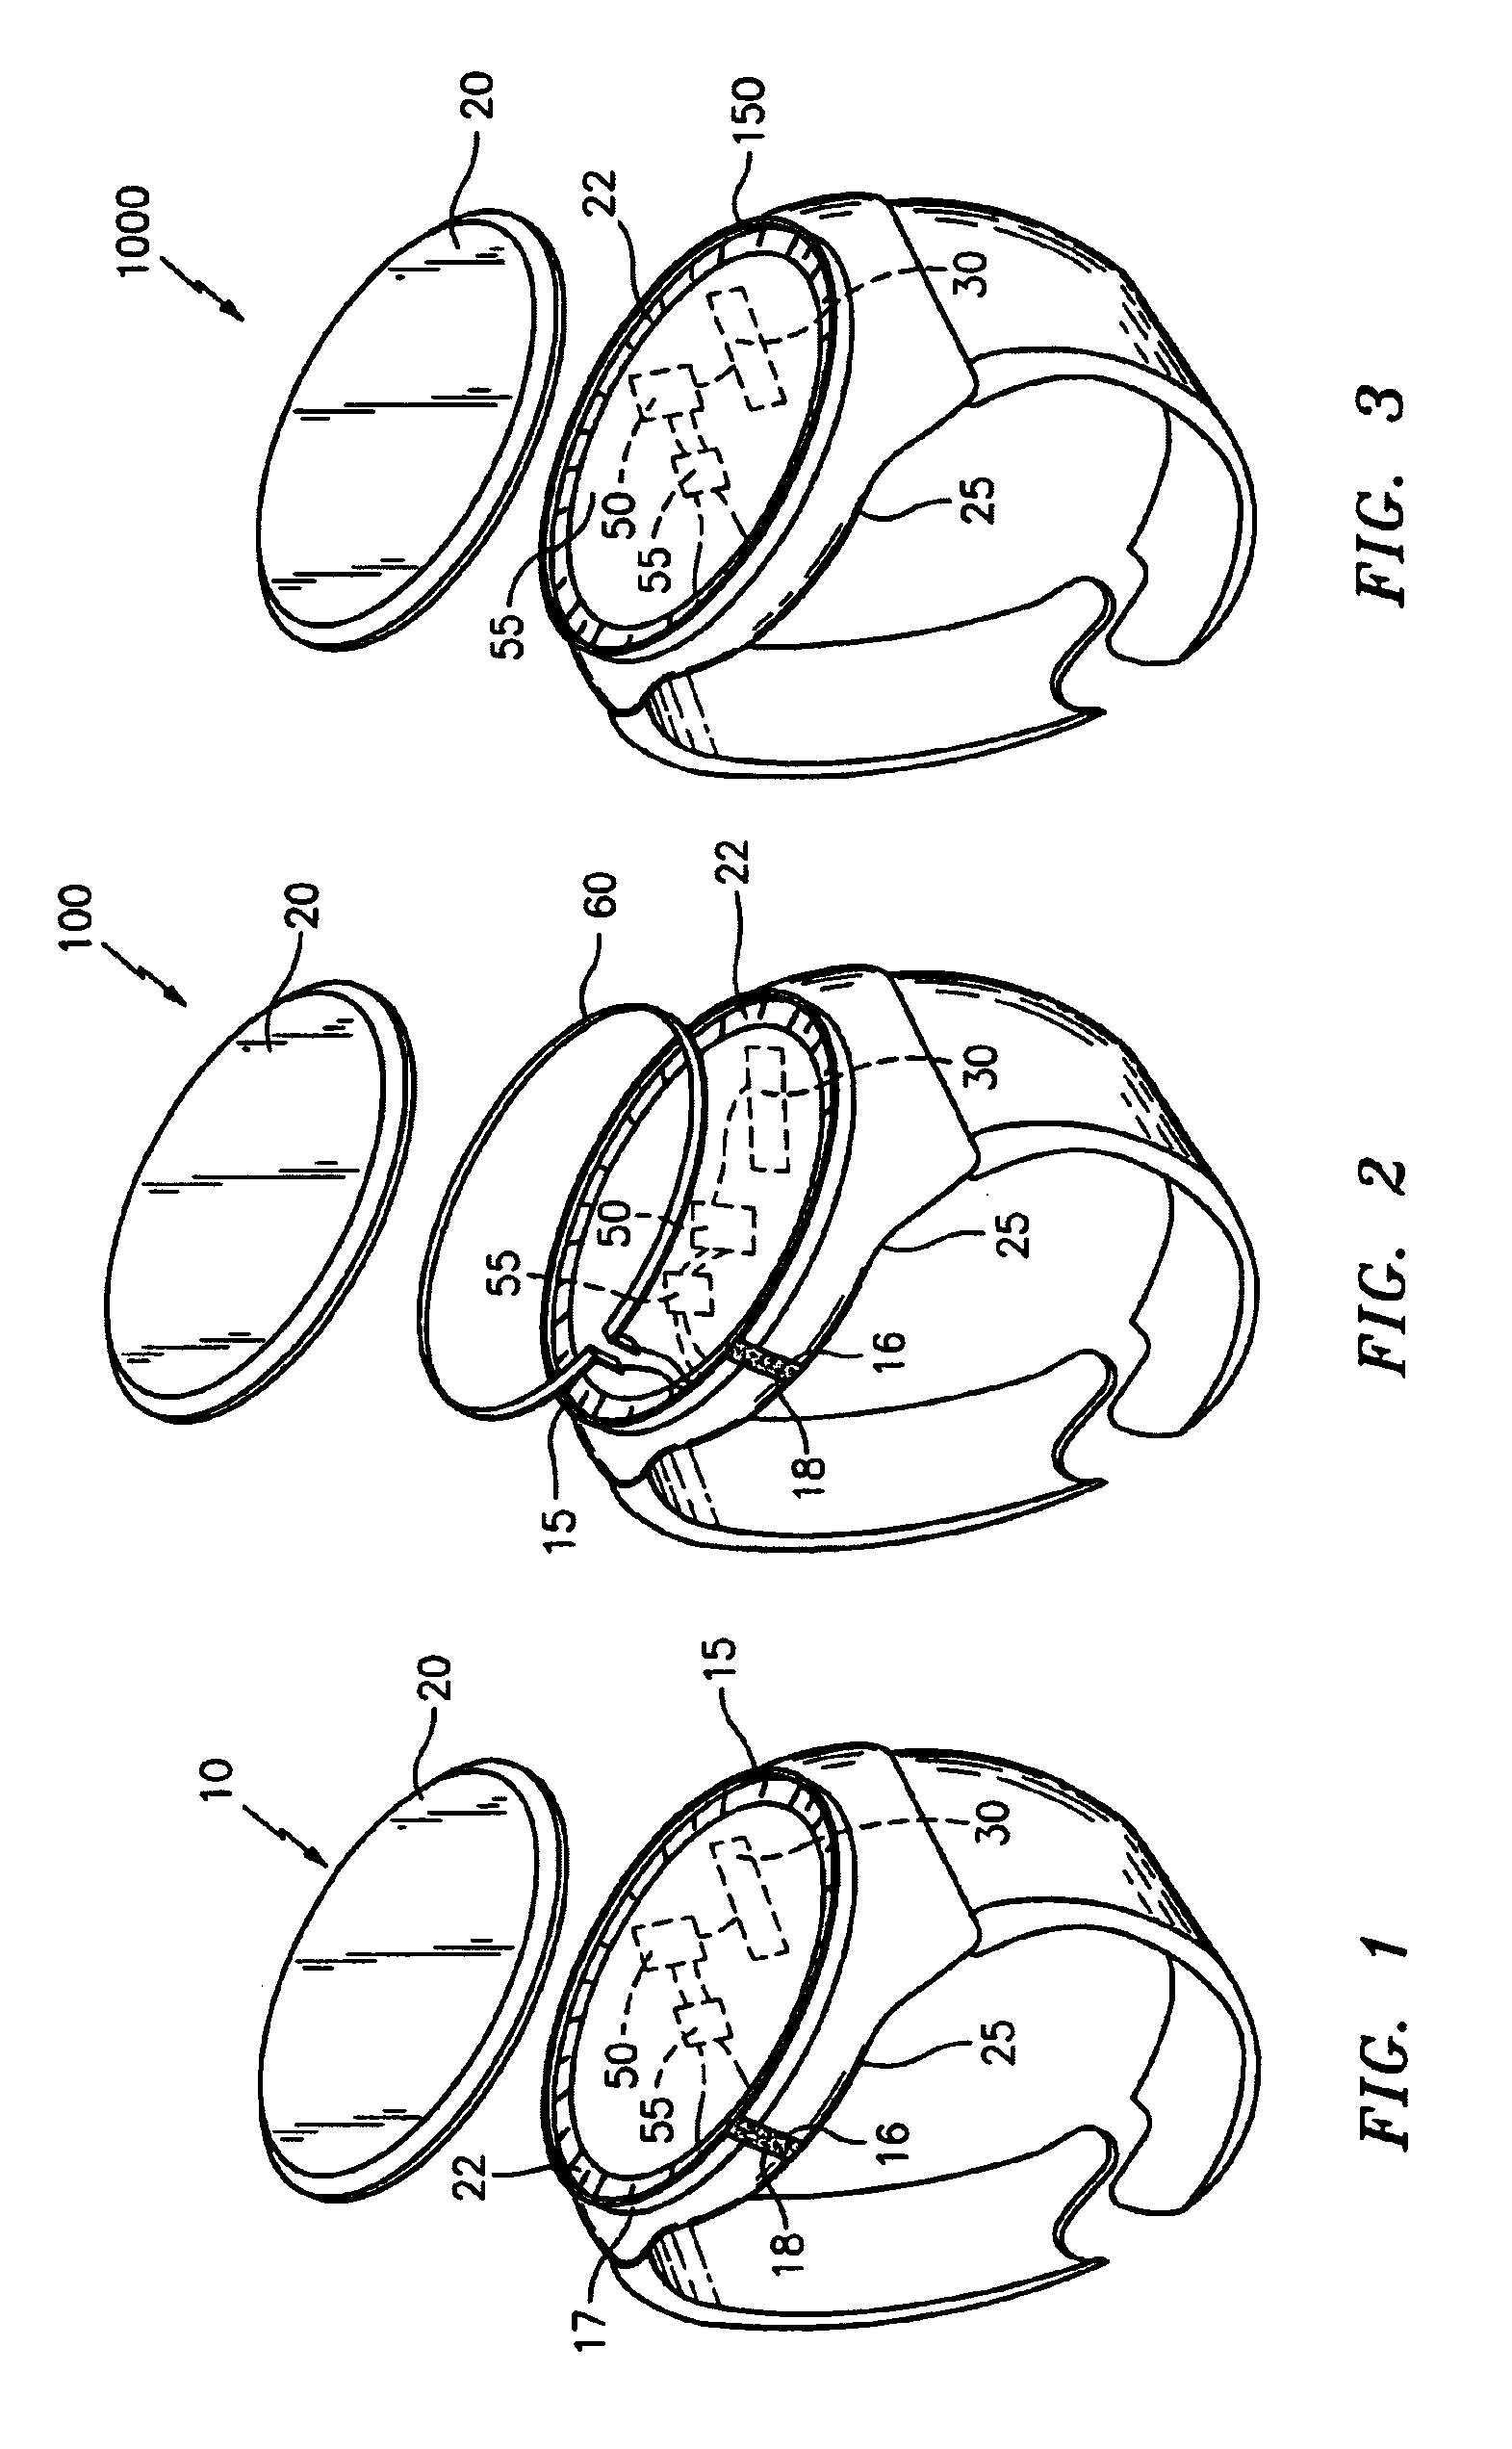 Antenna arrangement for an electronic device and an electronic device including same